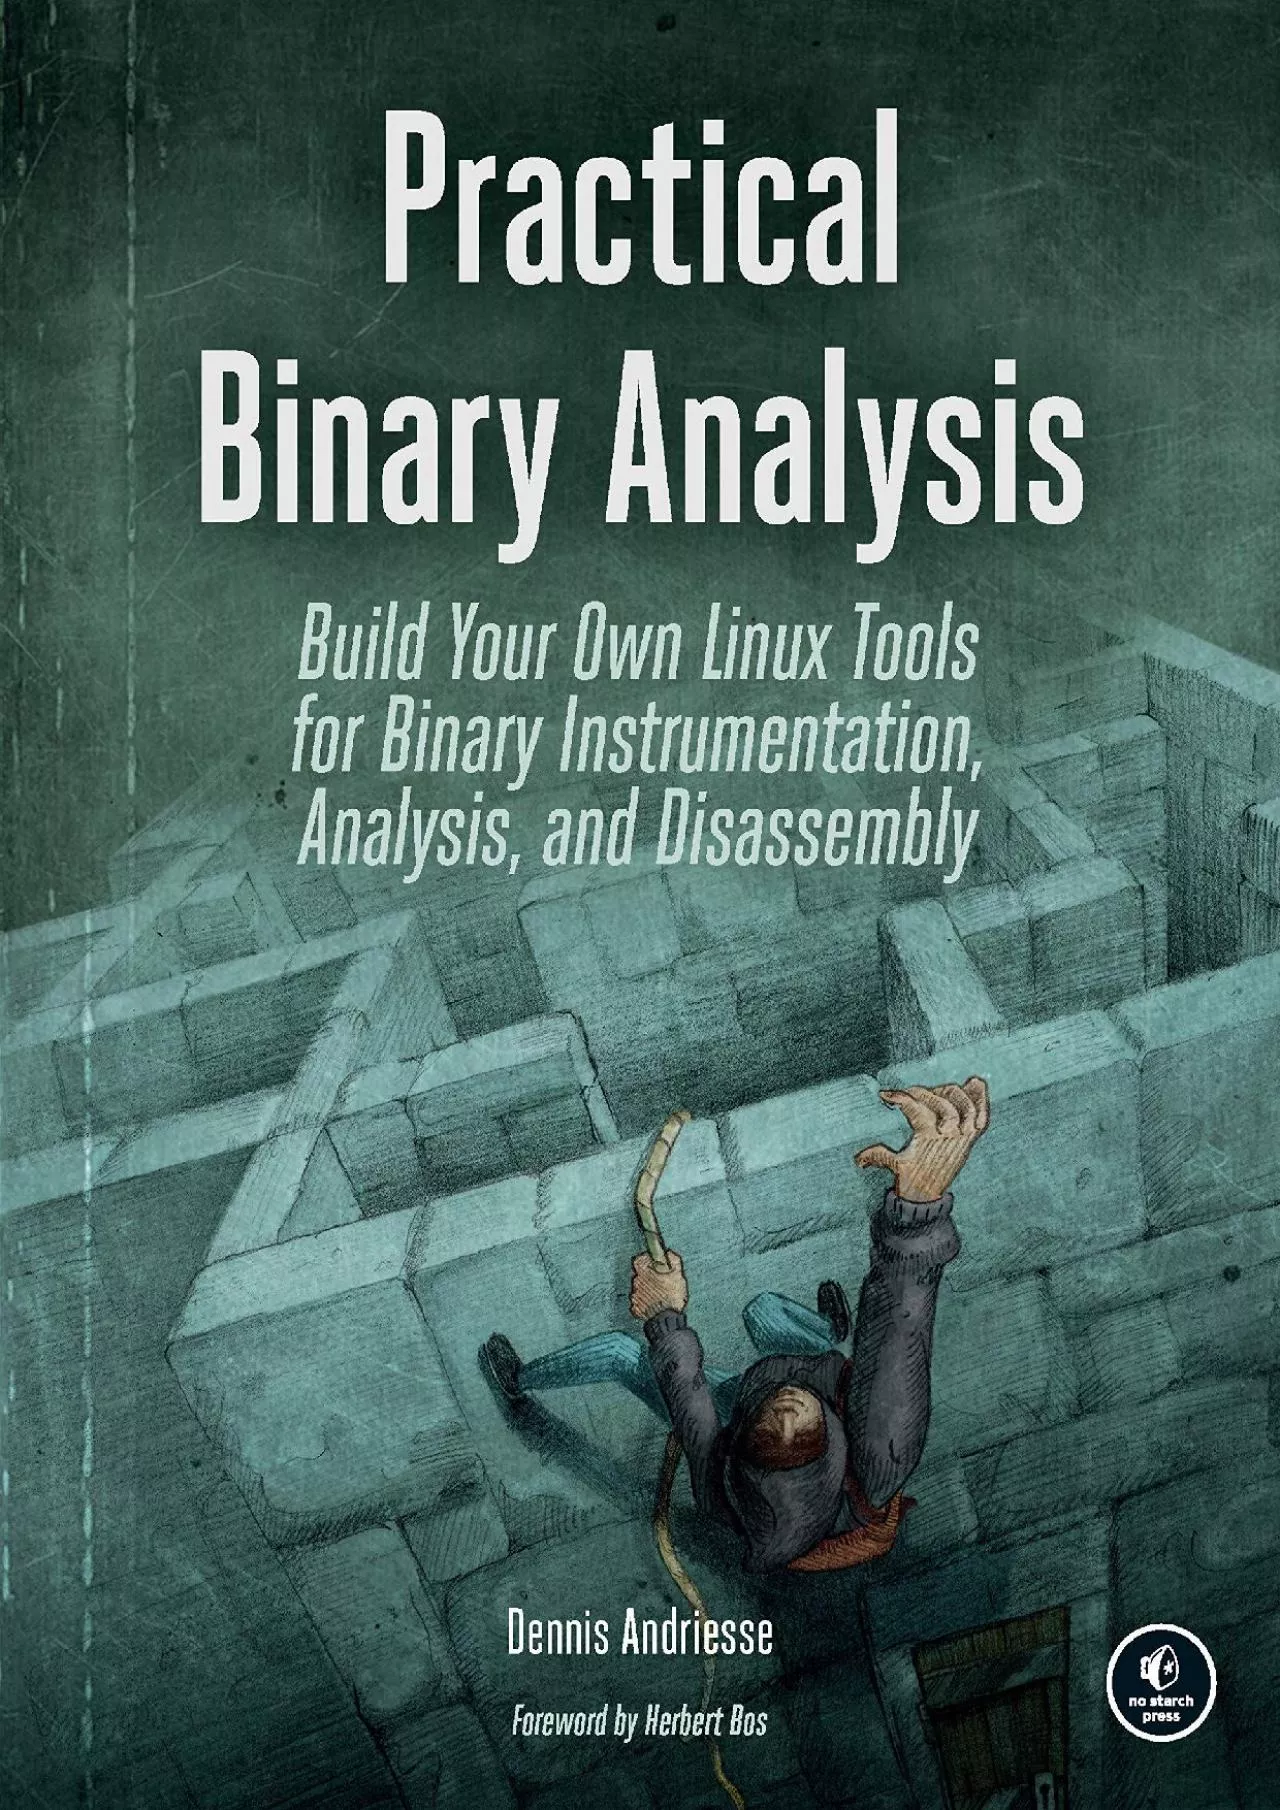 (BOOK)-Practical Binary Analysis: Build Your Own Linux Tools for Binary Instrumentation,